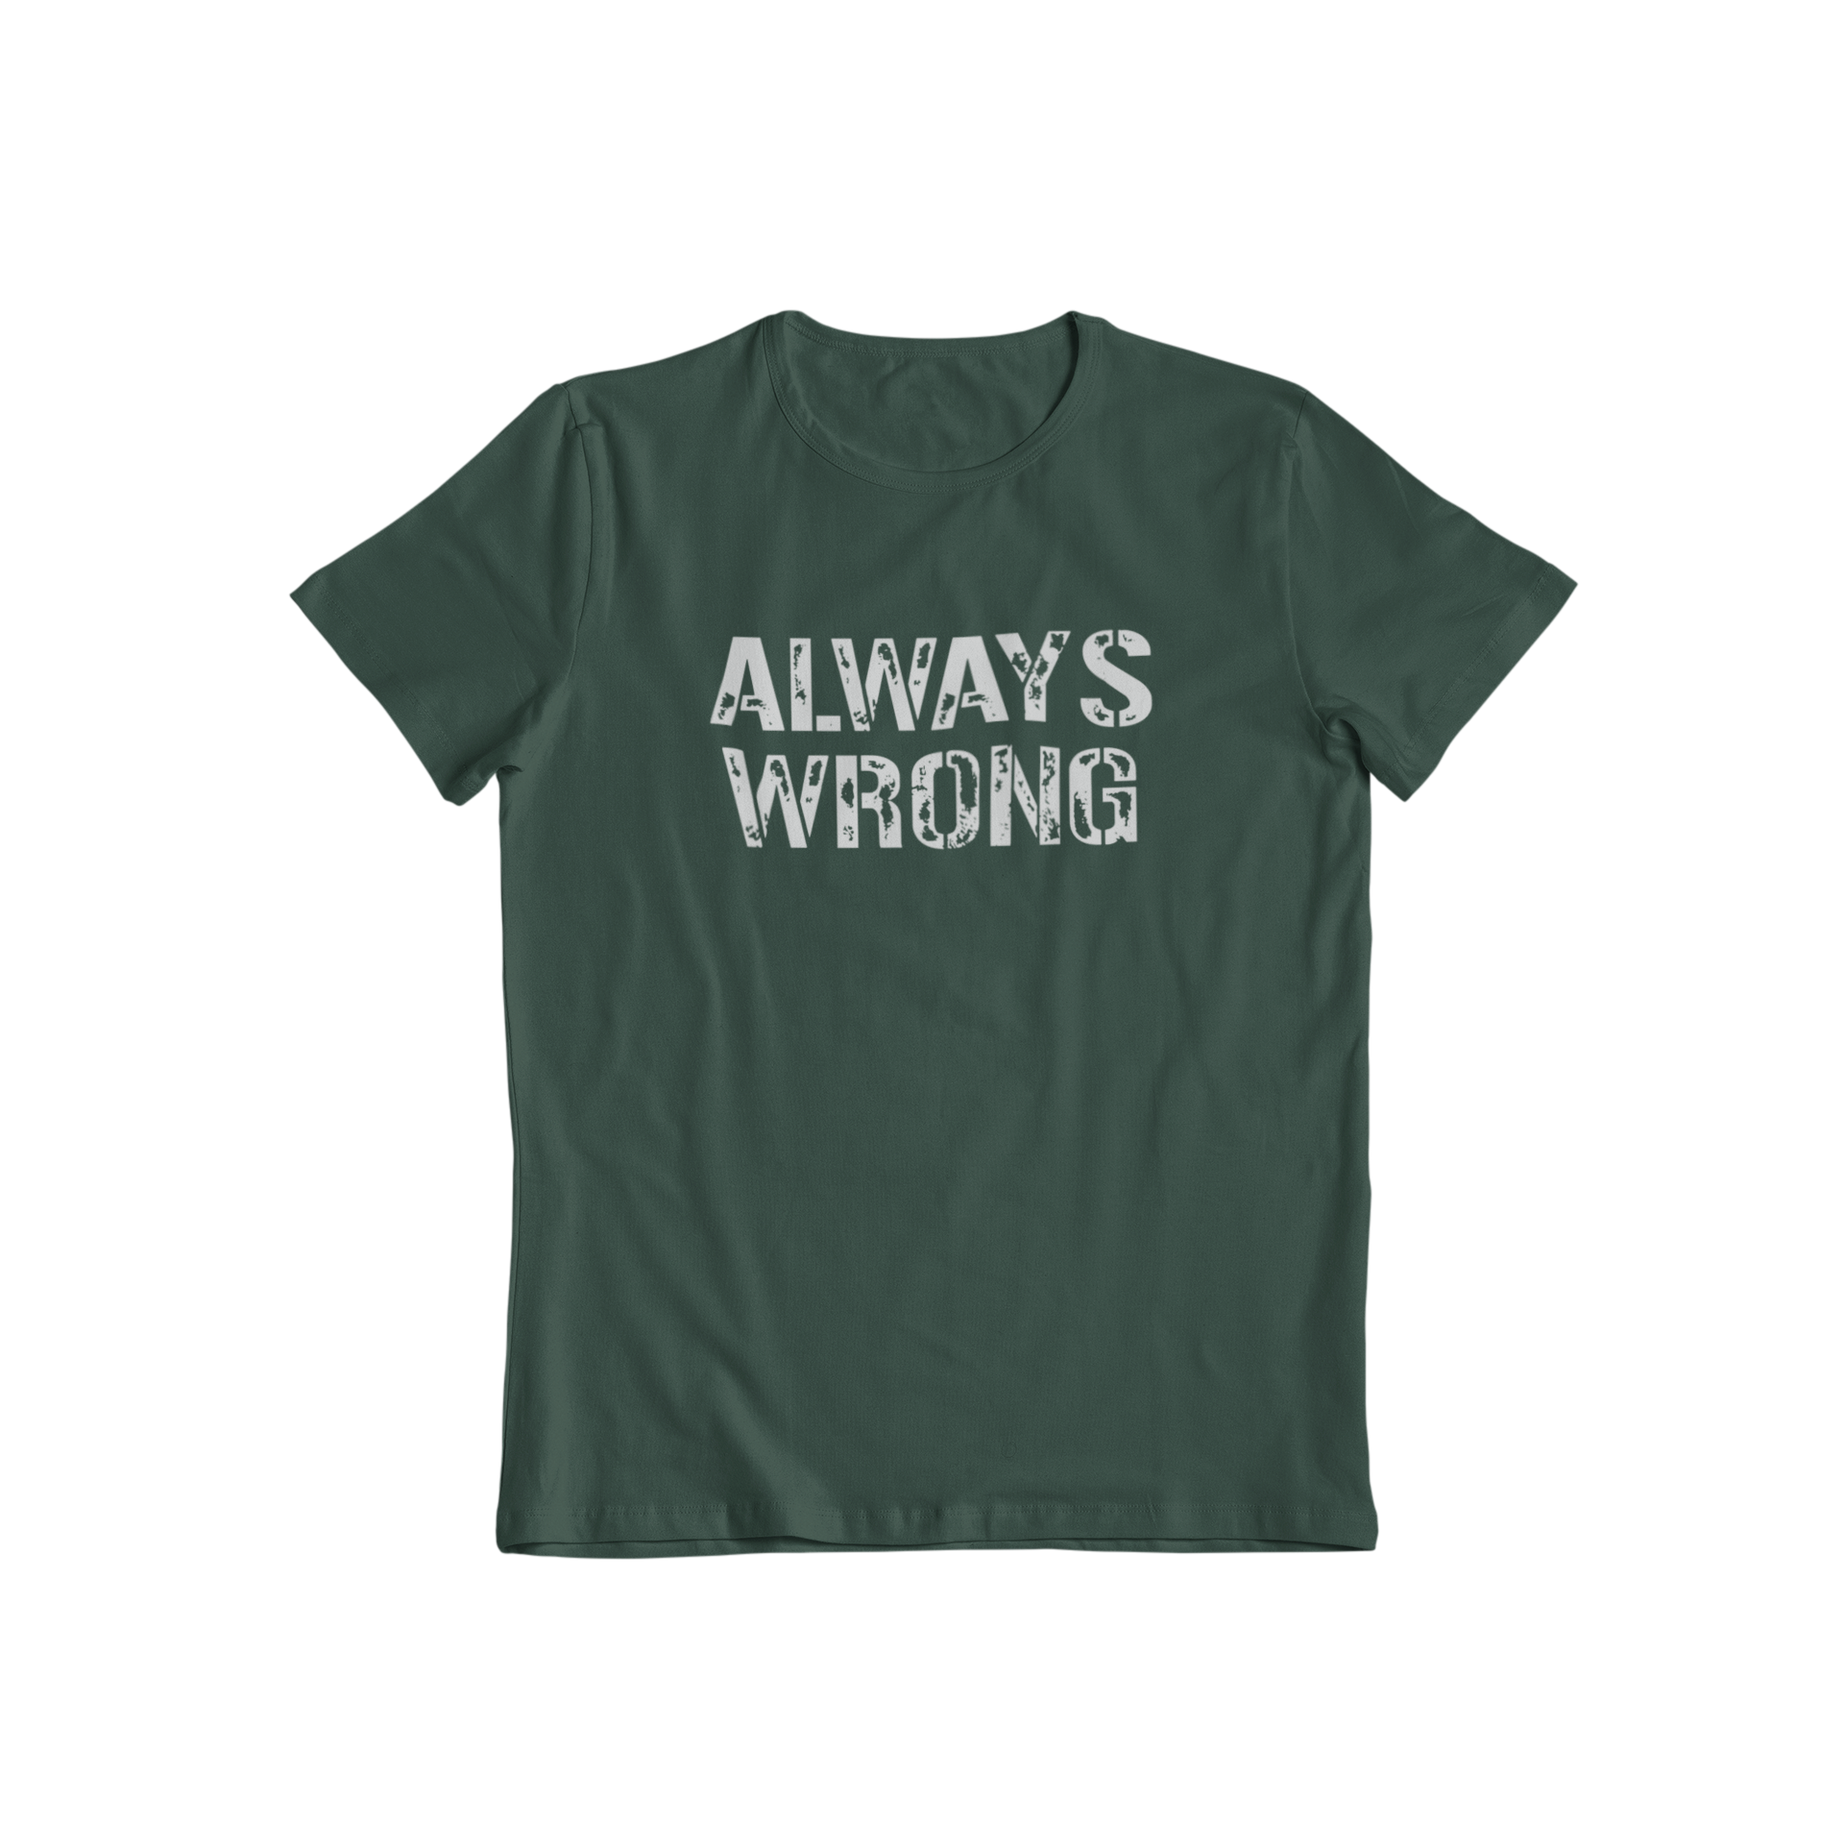 This 'Always Wrong' t-shirt is the perfect match for our 'Always Right' tee. Show off your sense of humor with this matching set, perfect for couples, friends, or anyone looking to make a statement. Made with high-quality materials for long-lasting comfort.